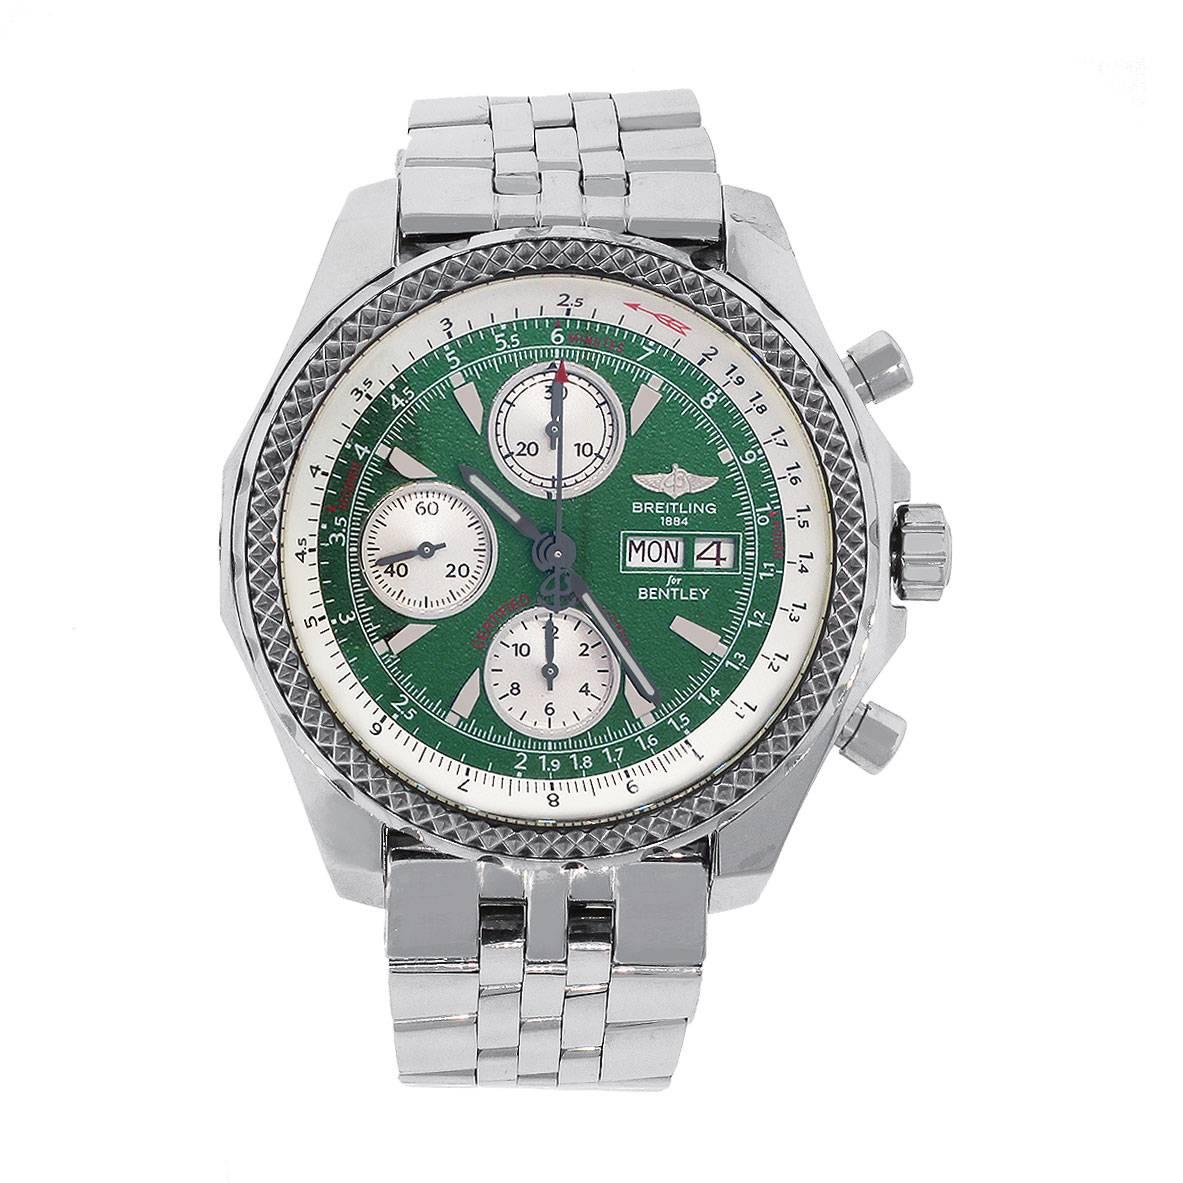 Brand: Breitlind
MPN: A13362
Model: Bentley GT
Case Material: Stainless Steel
Case Diameter: 45mm
Crystal: sapphire crystal
Bezel: Stainless steel unidirectional bezel
Dial: Green chronograph dial with silver stick. Date window displayed at the 3